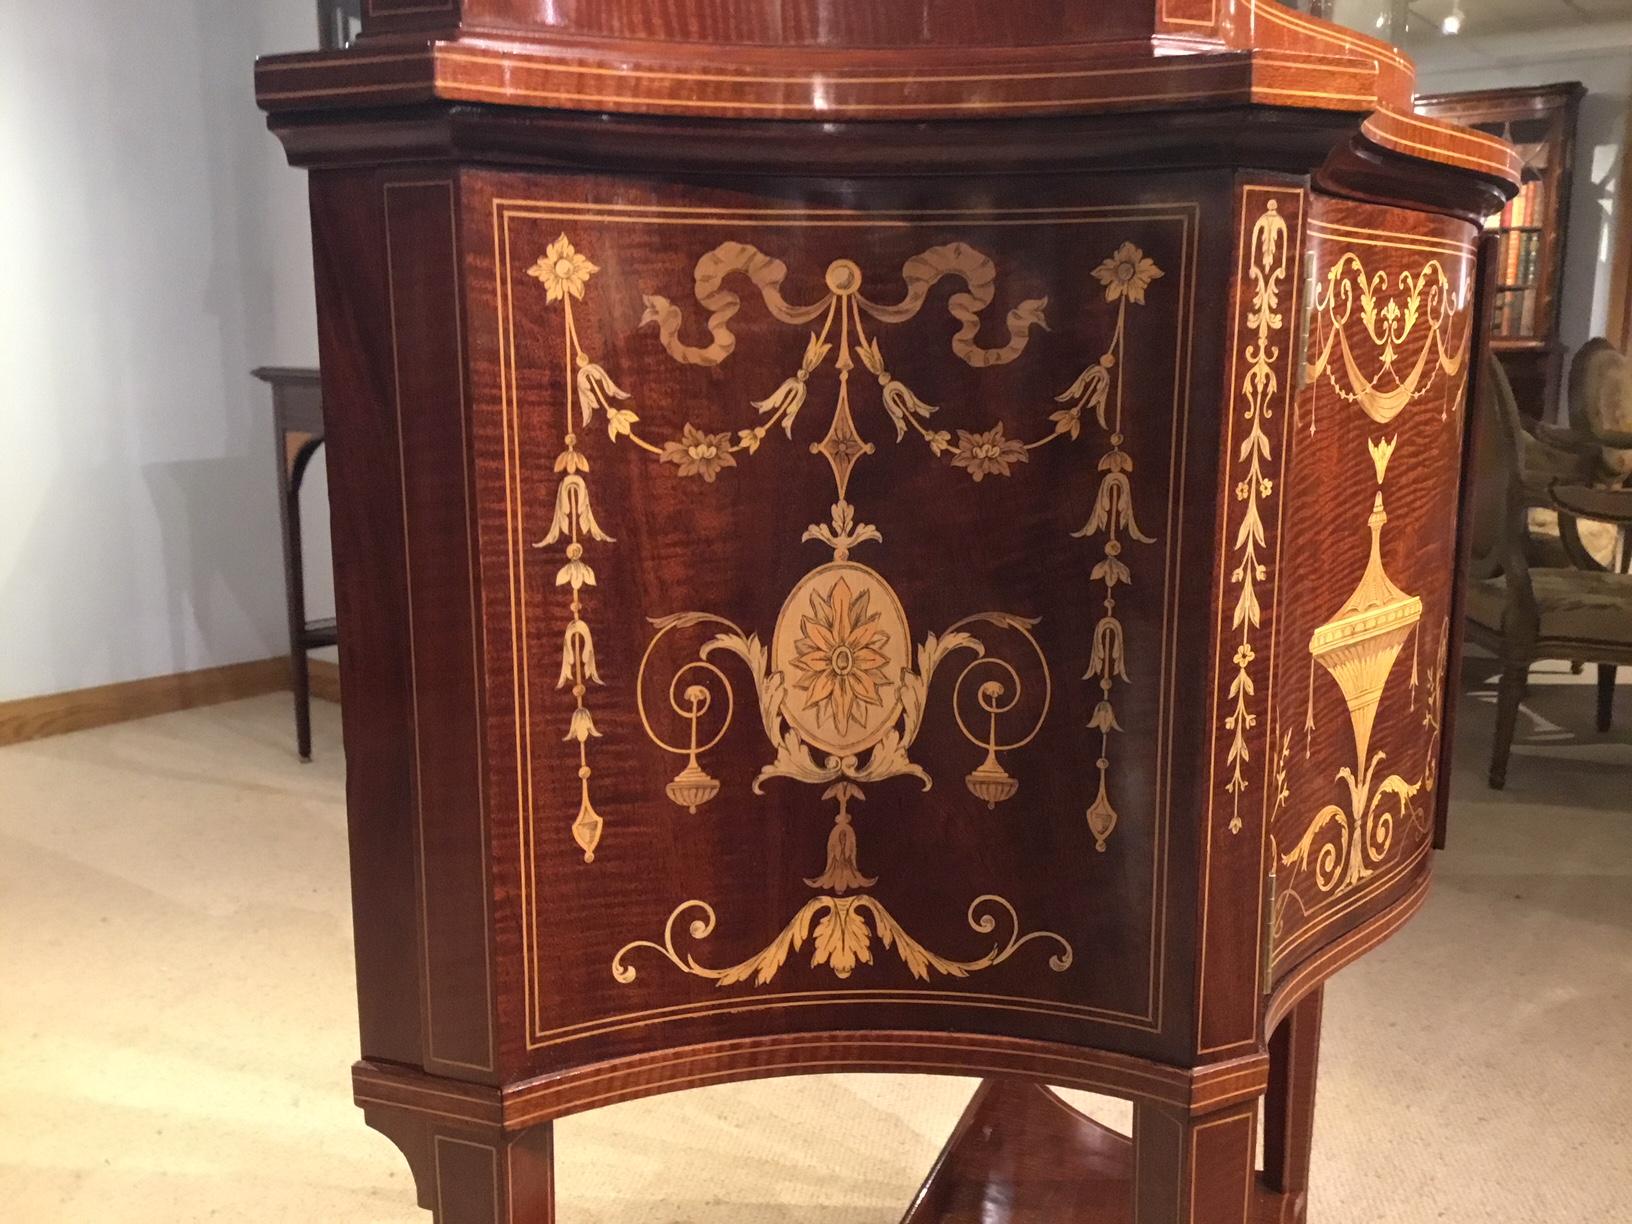  Marquetry Inlaid Edwardian Period Serpentine Cabinet by Maple 9